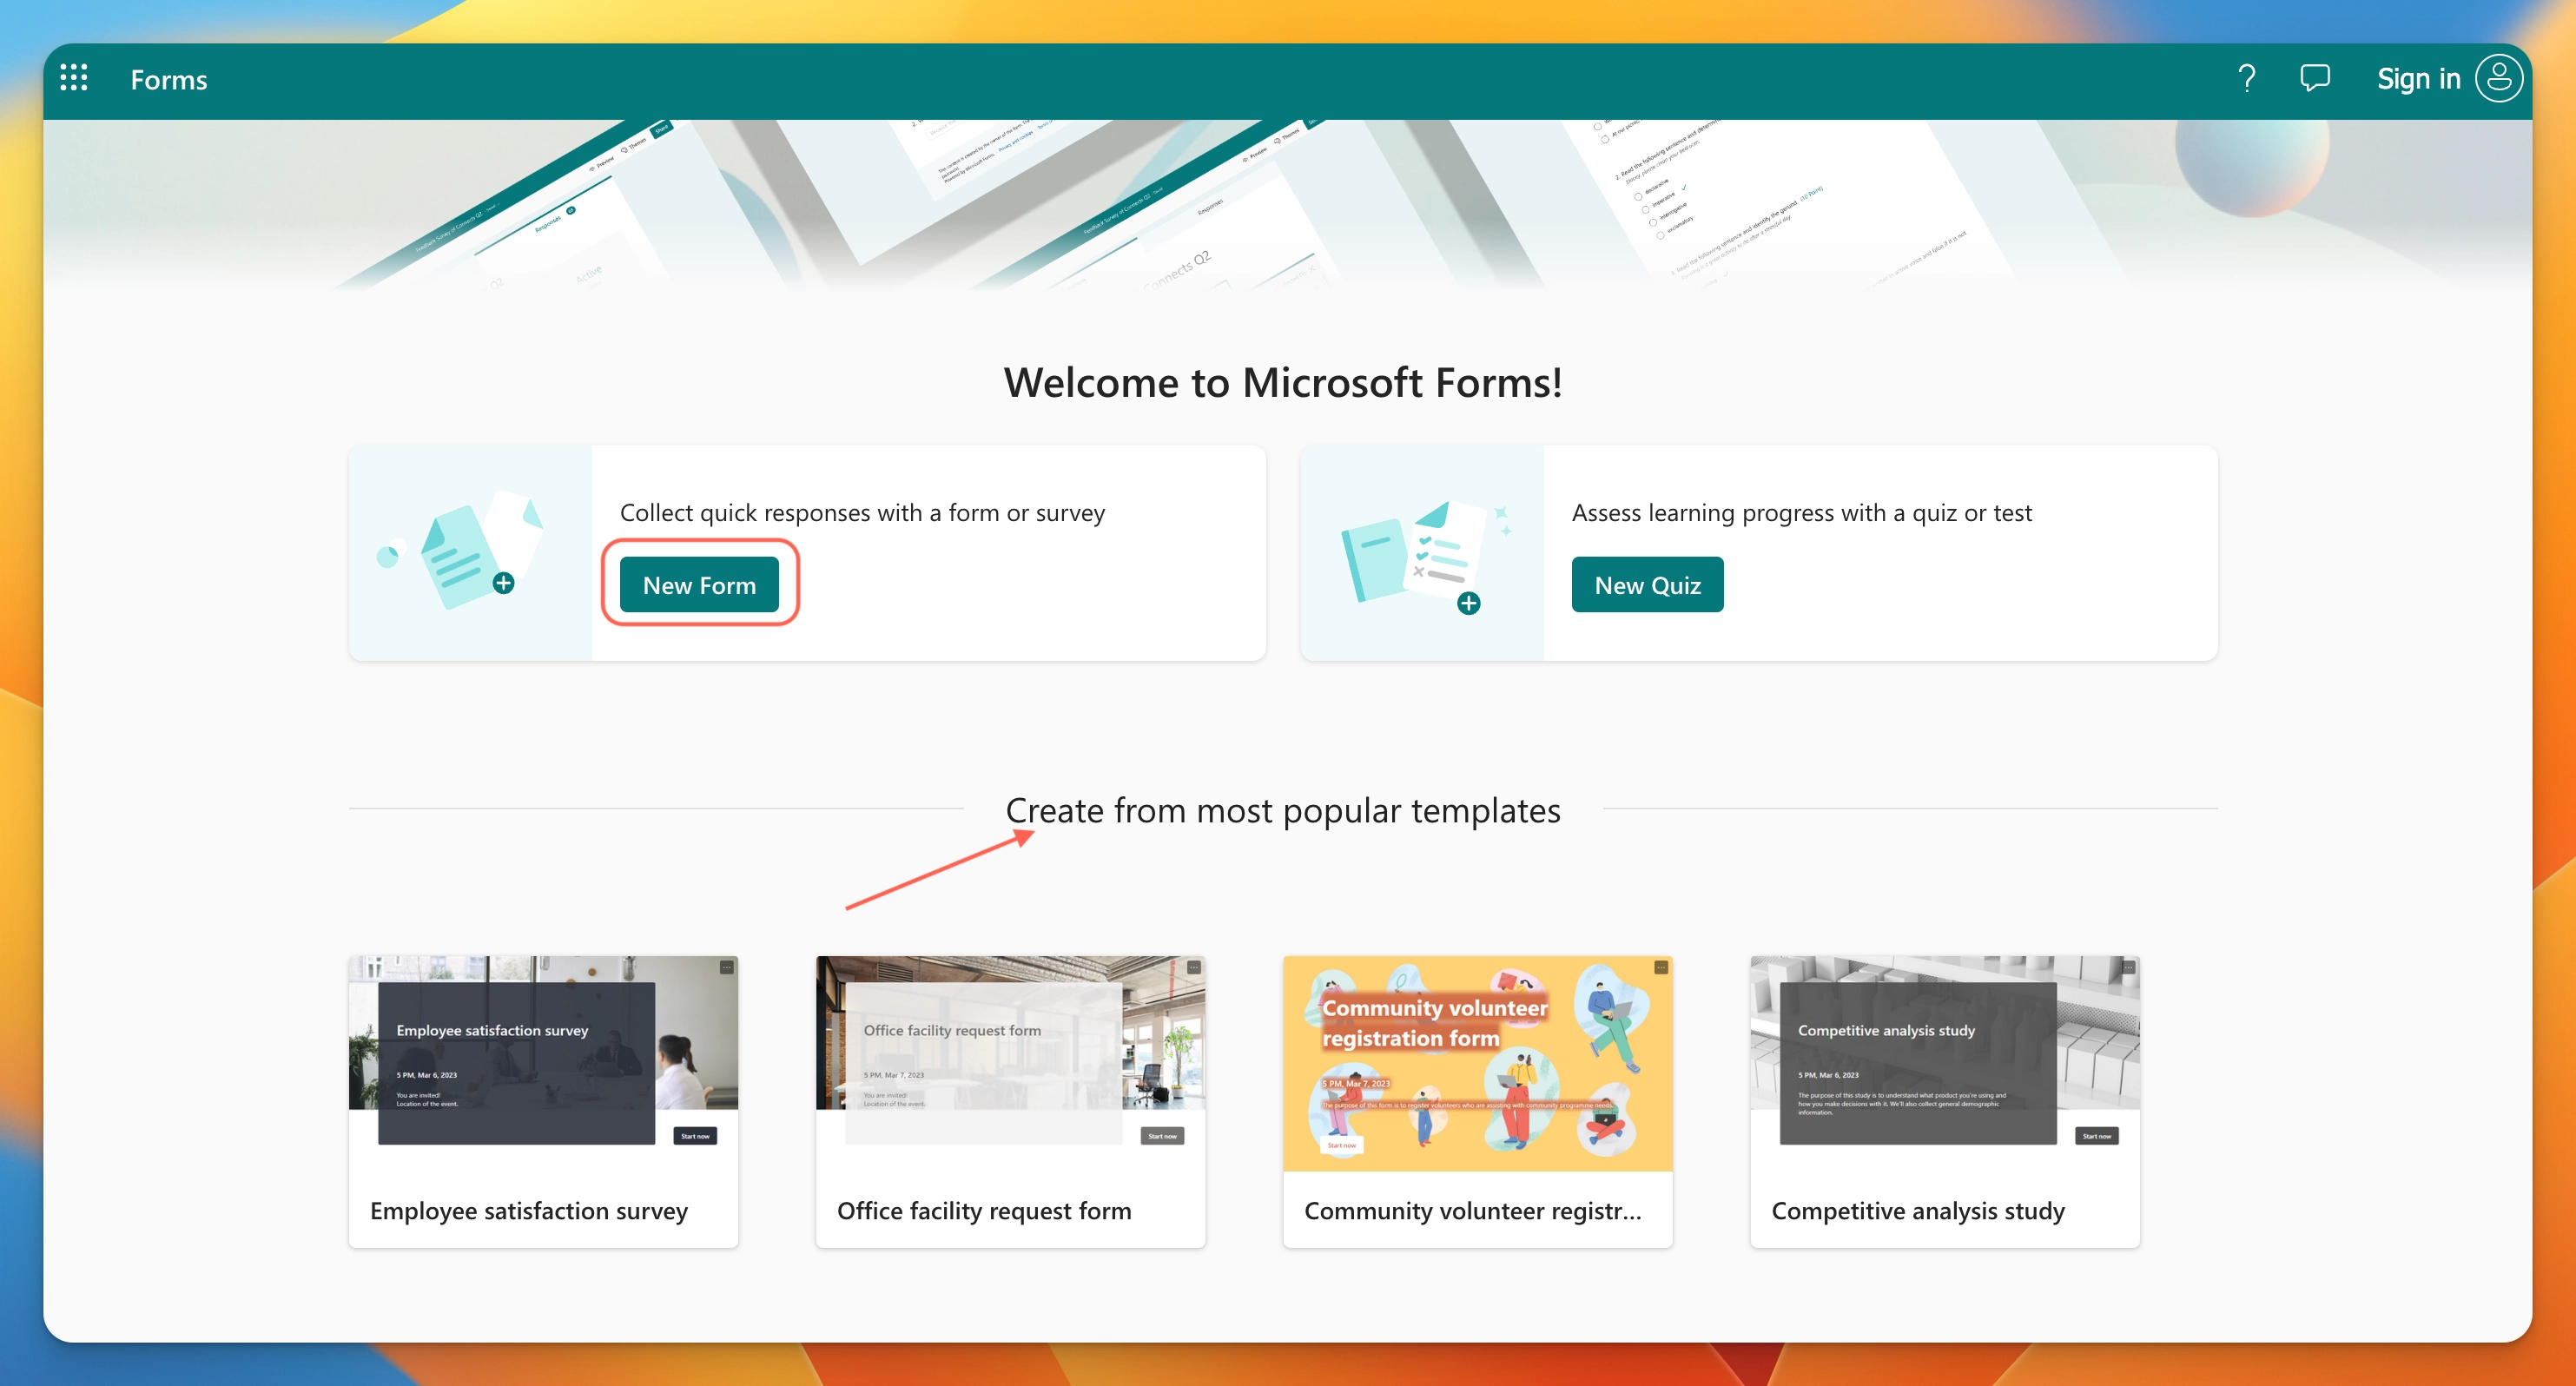 Creating a new from - Add Microsoft Forms